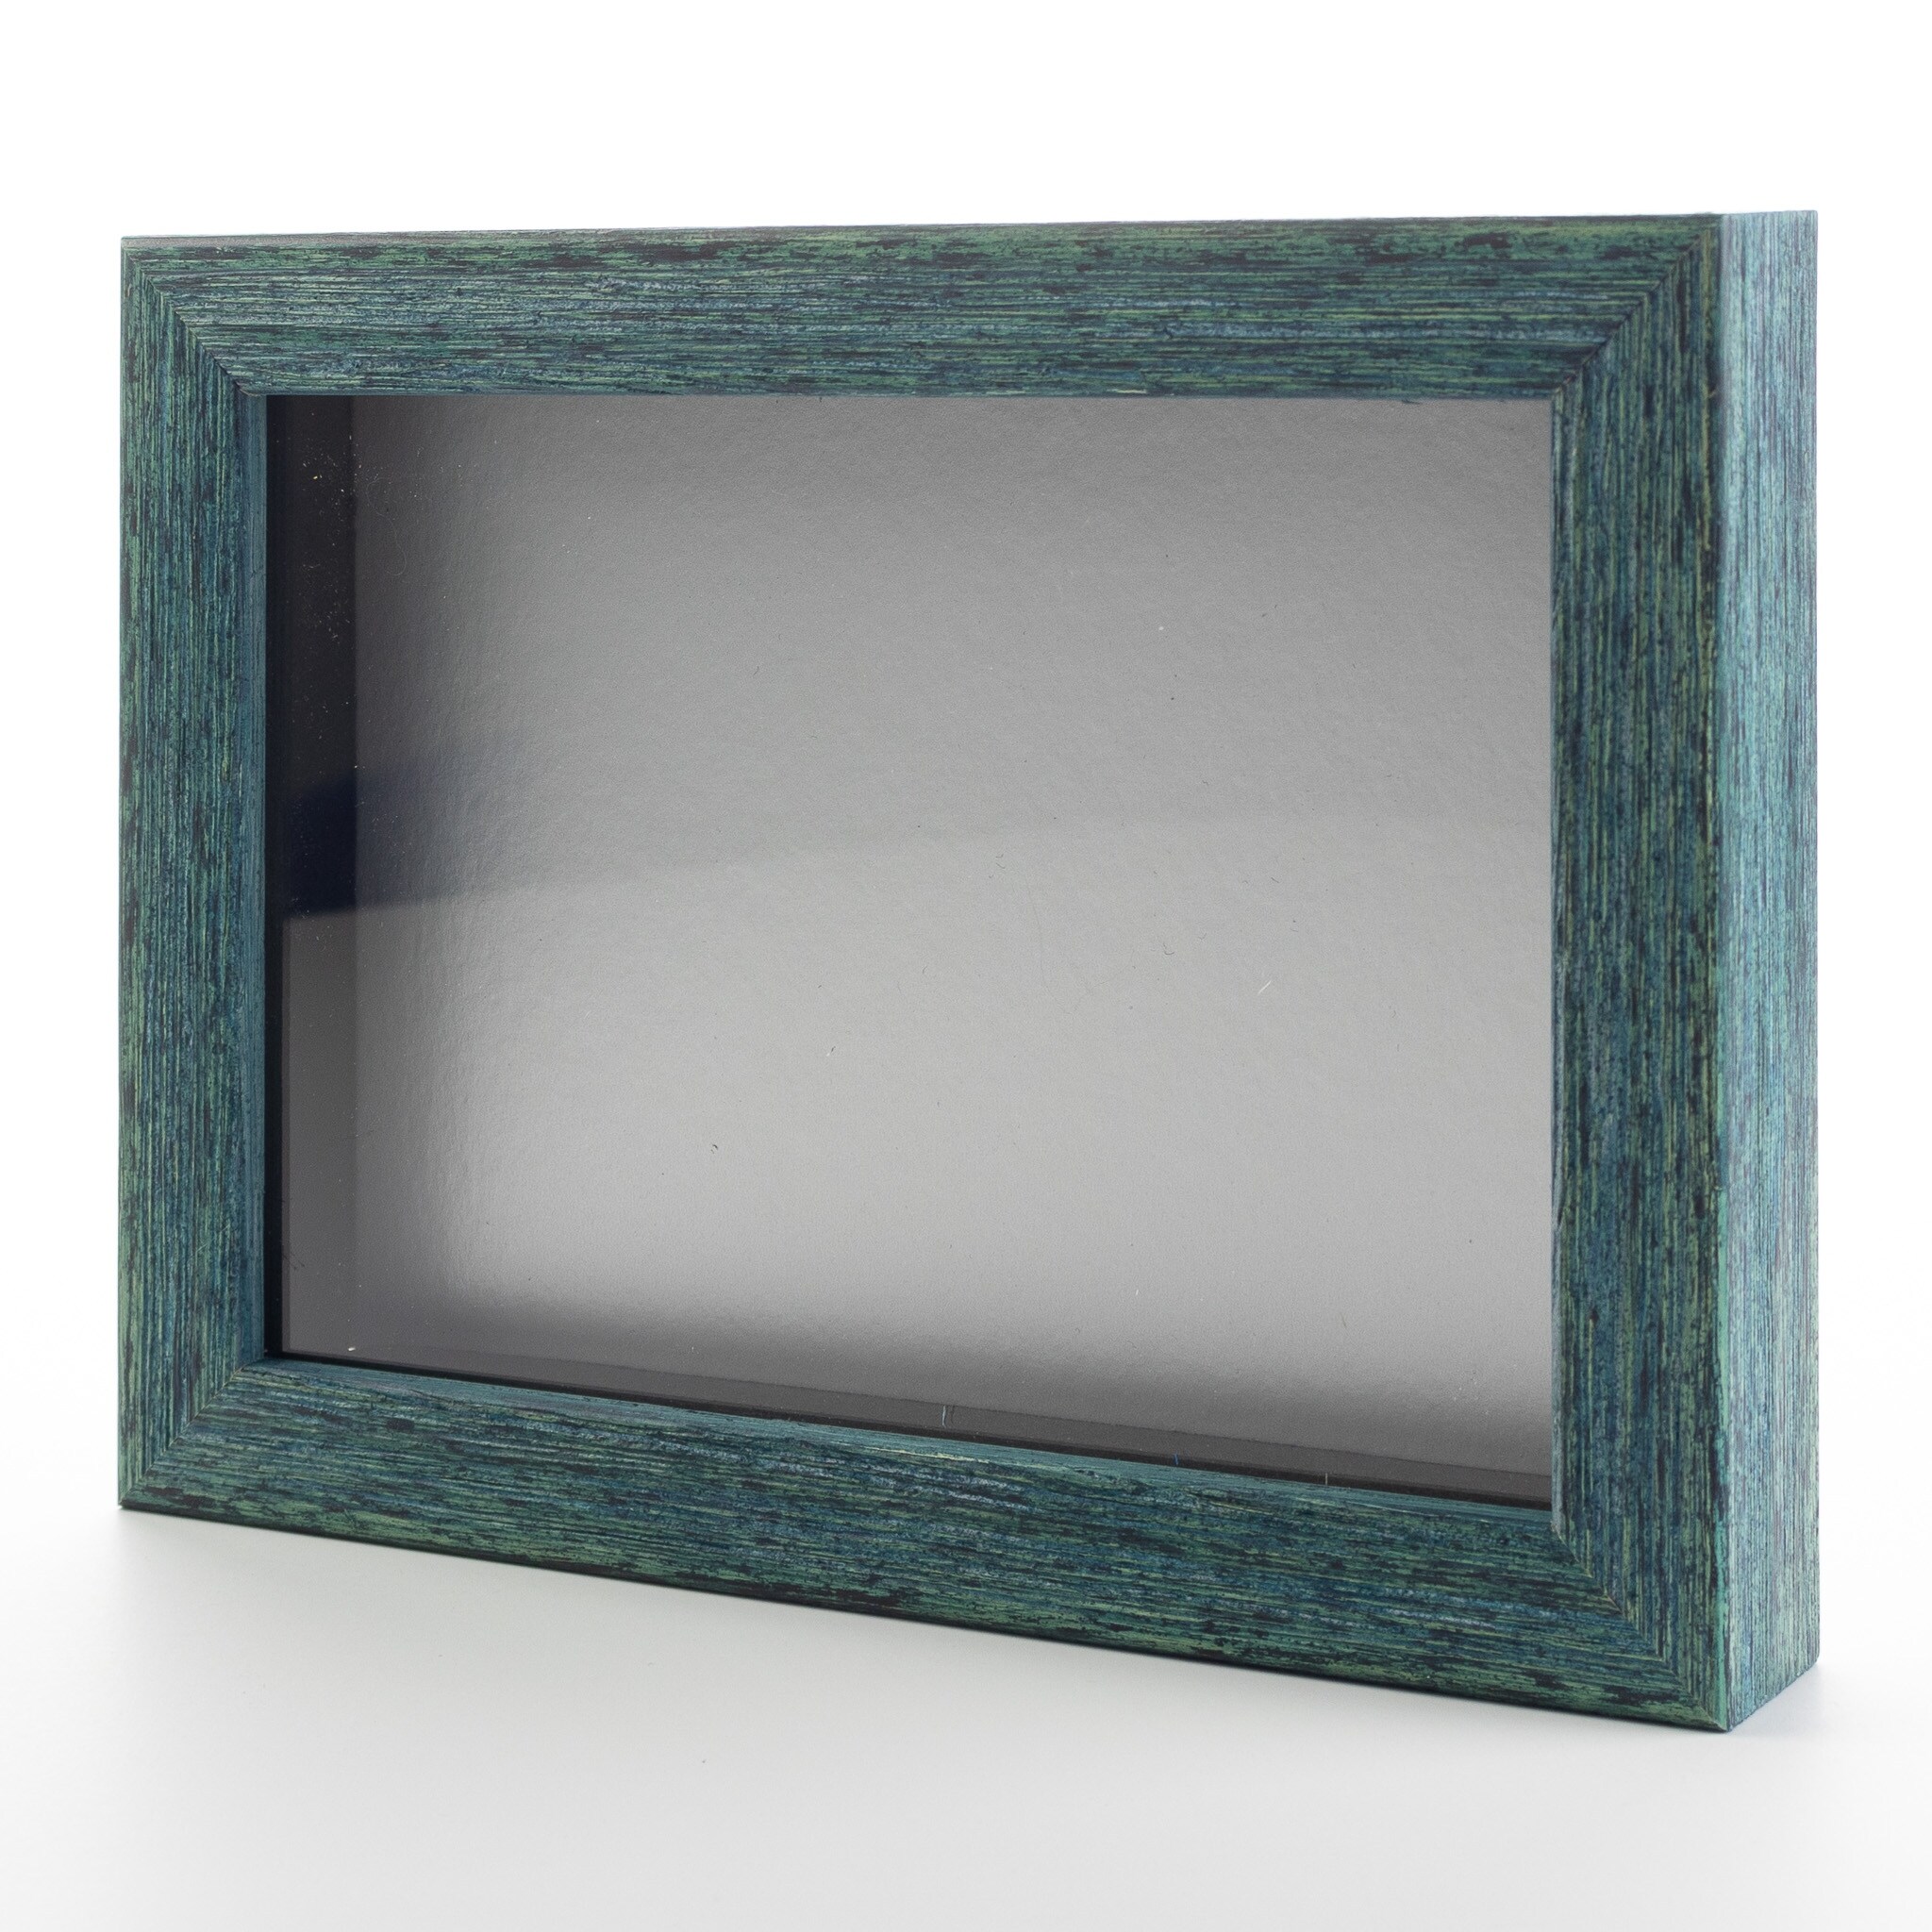 CustomPictureFrames.com 8x8 Shadow Box Frame Painted White Real Wood with A Blue Acid-Free Backing | 3/4 of Usuable Depth | UV Resistant Acrylic